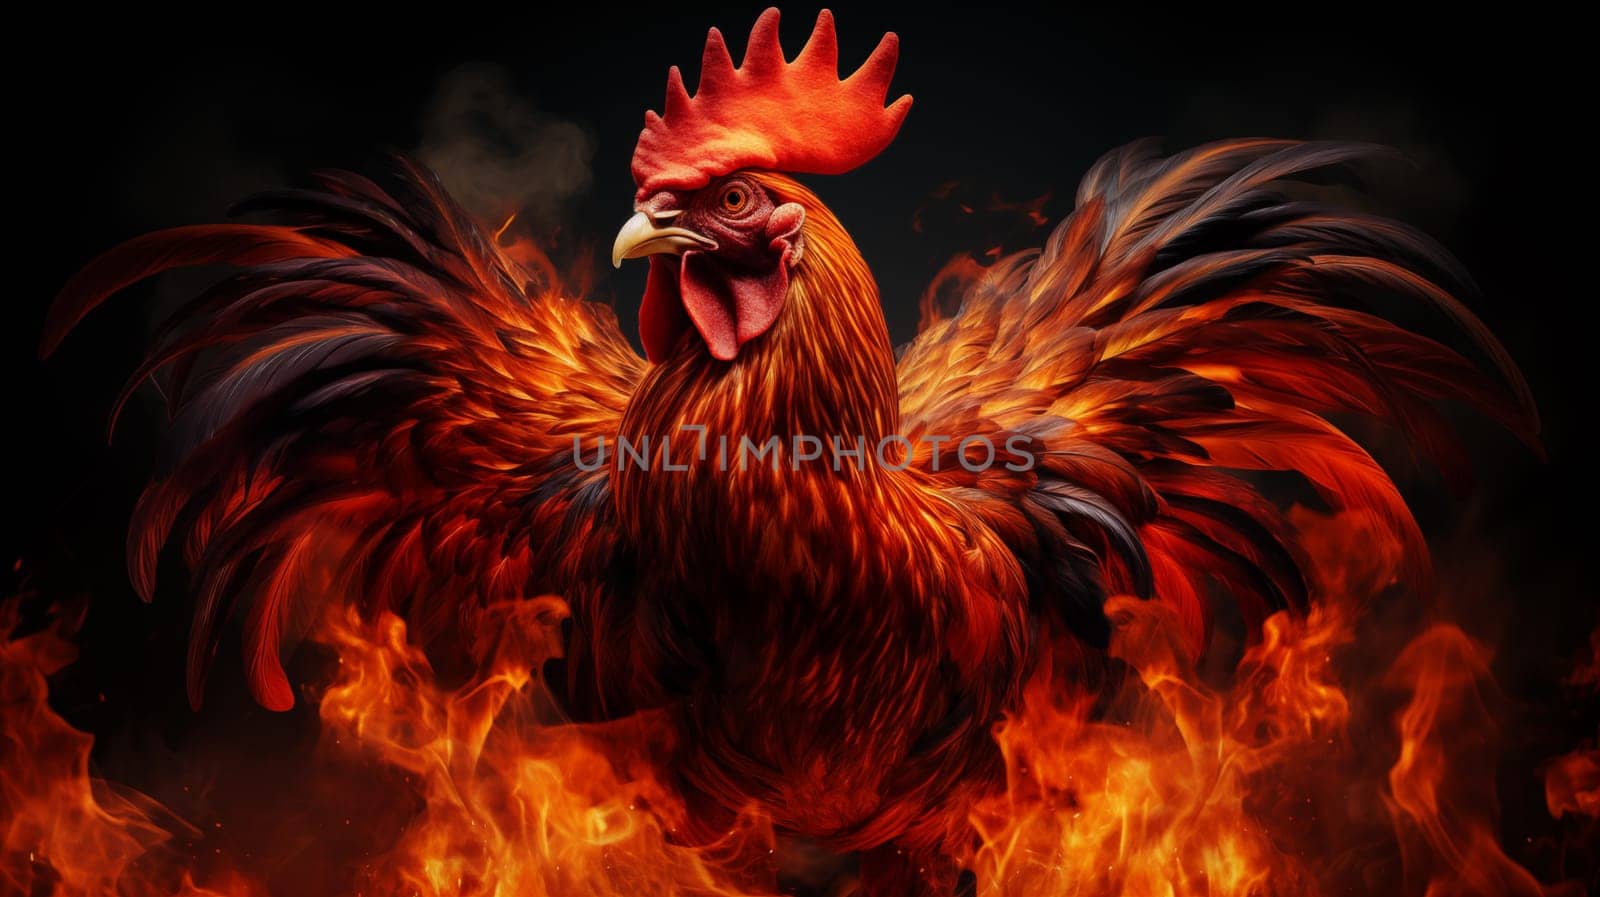 A red rooster stands on a fiery background, with his wings spread, on a black background by Zakharova